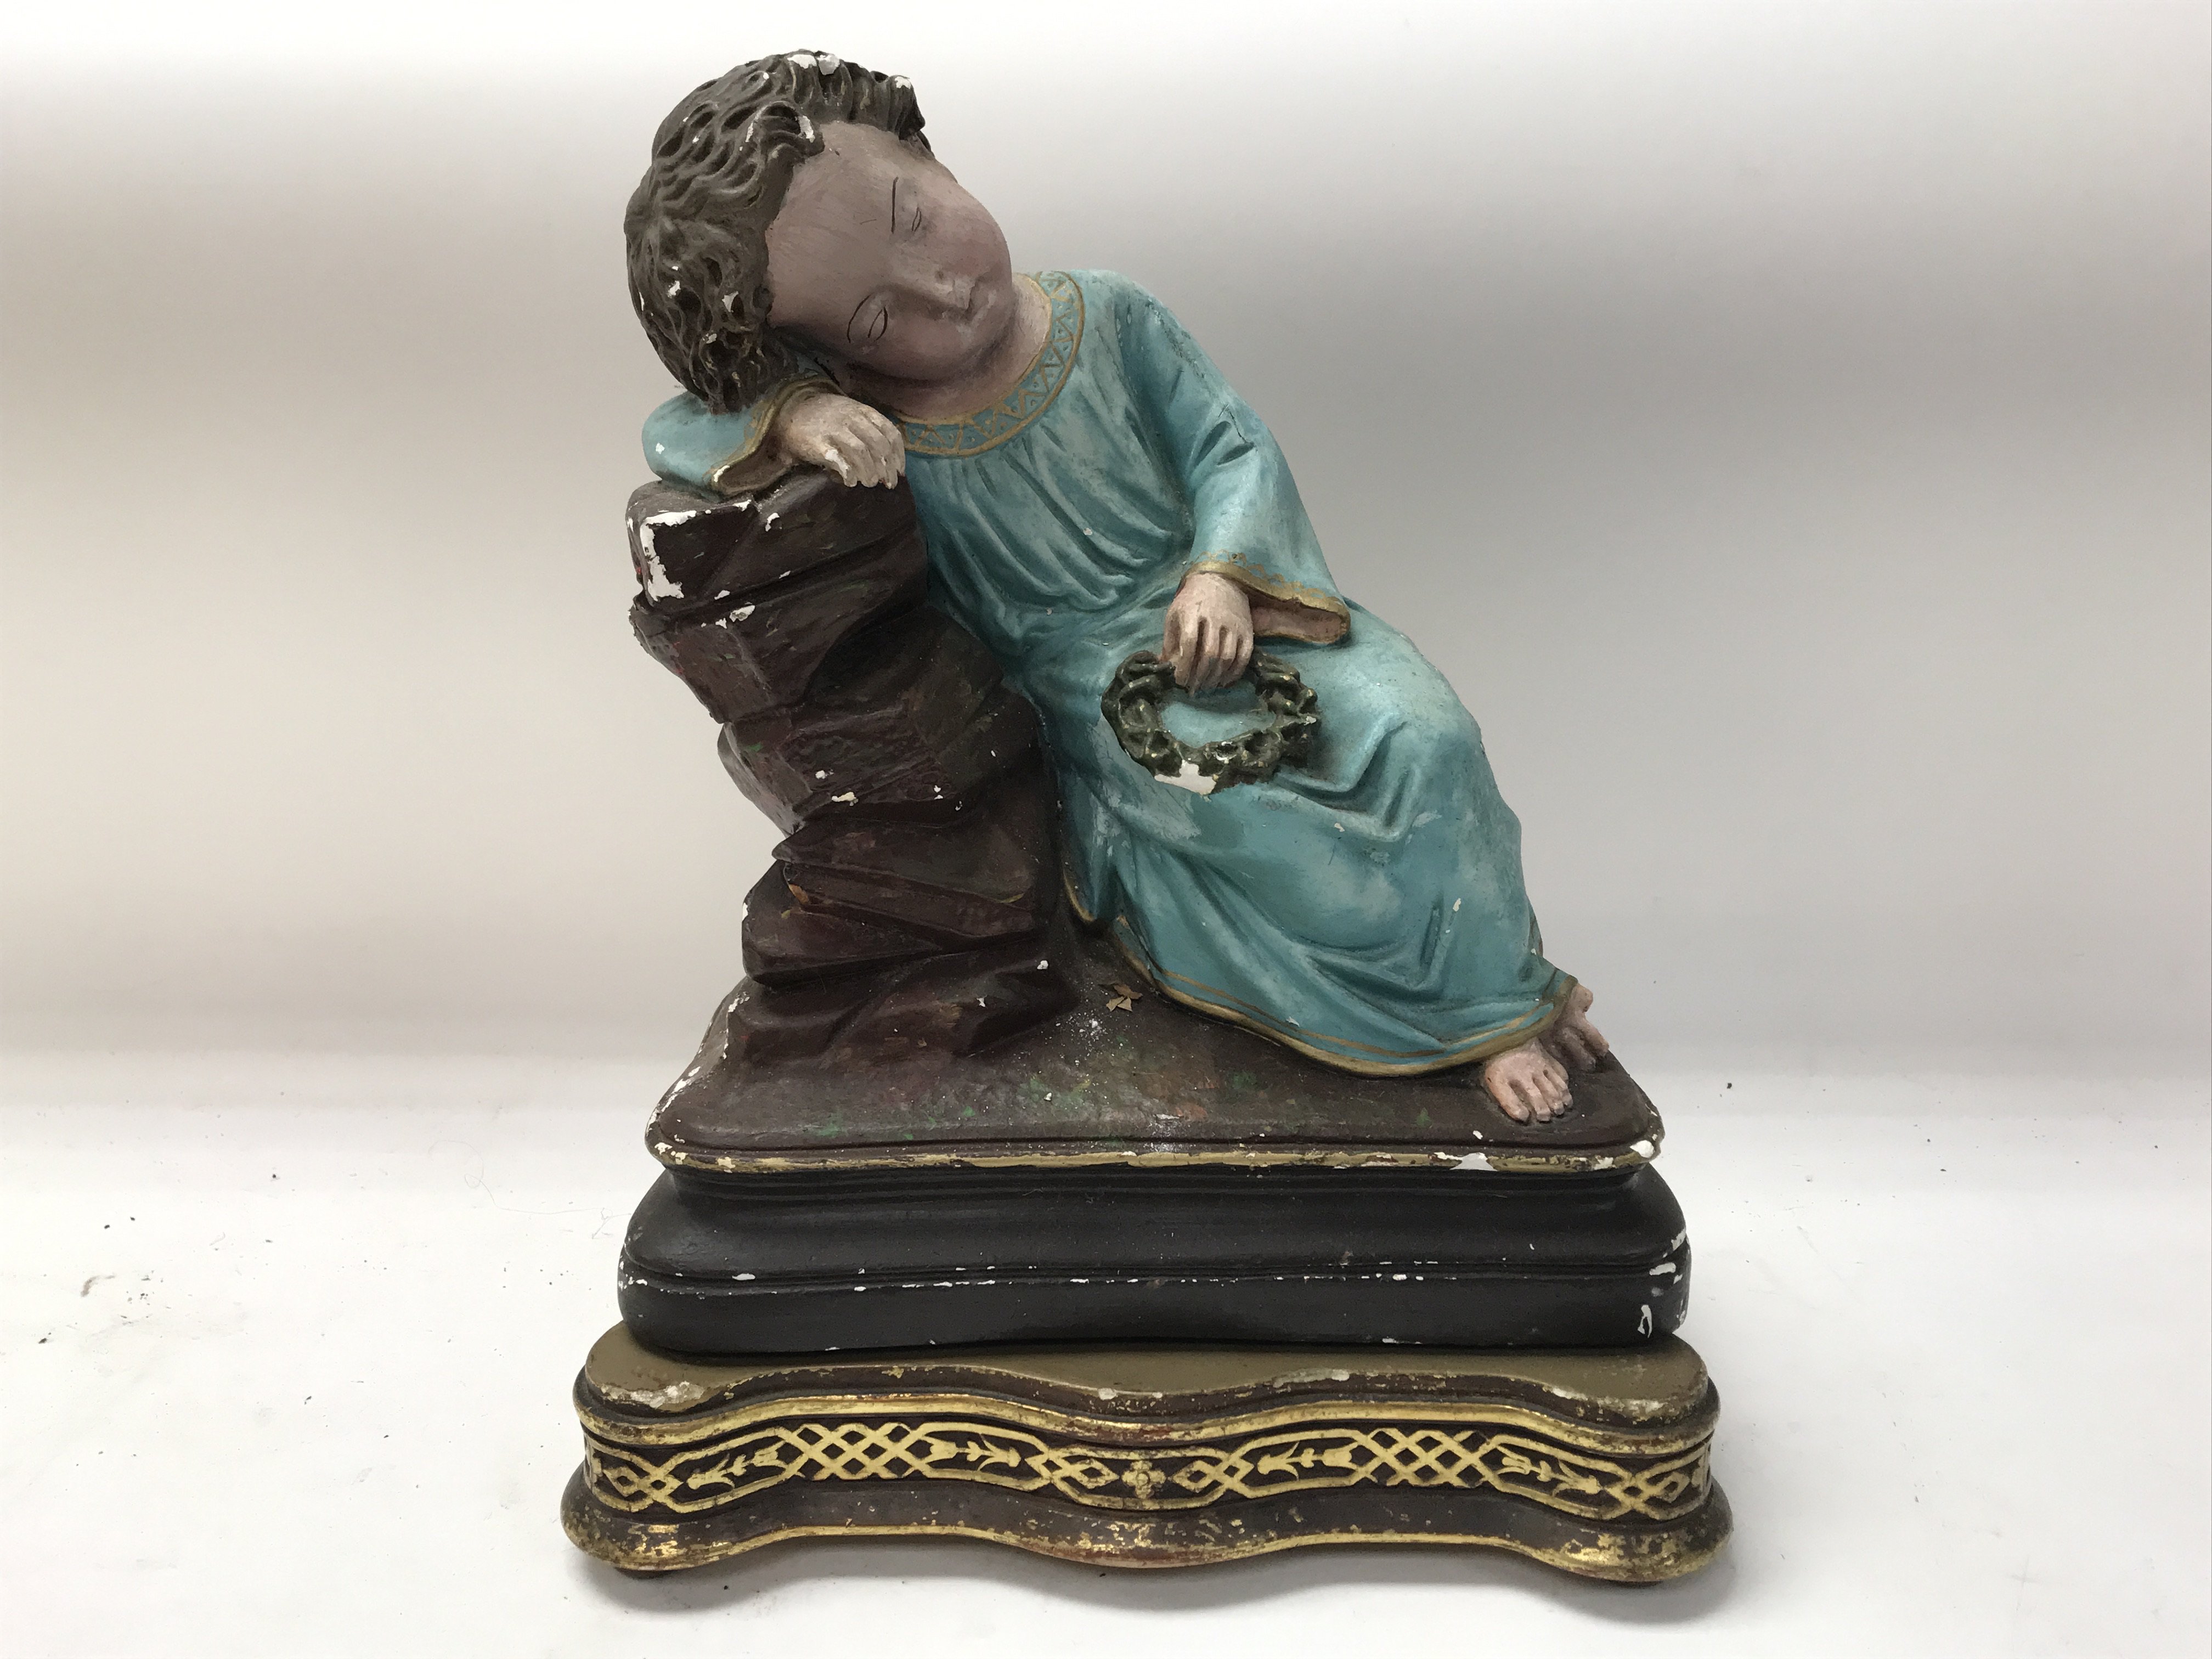 Infant Jesus statue with Crown of Thorns, needs restoration due to paint chips. Approximately 30cm